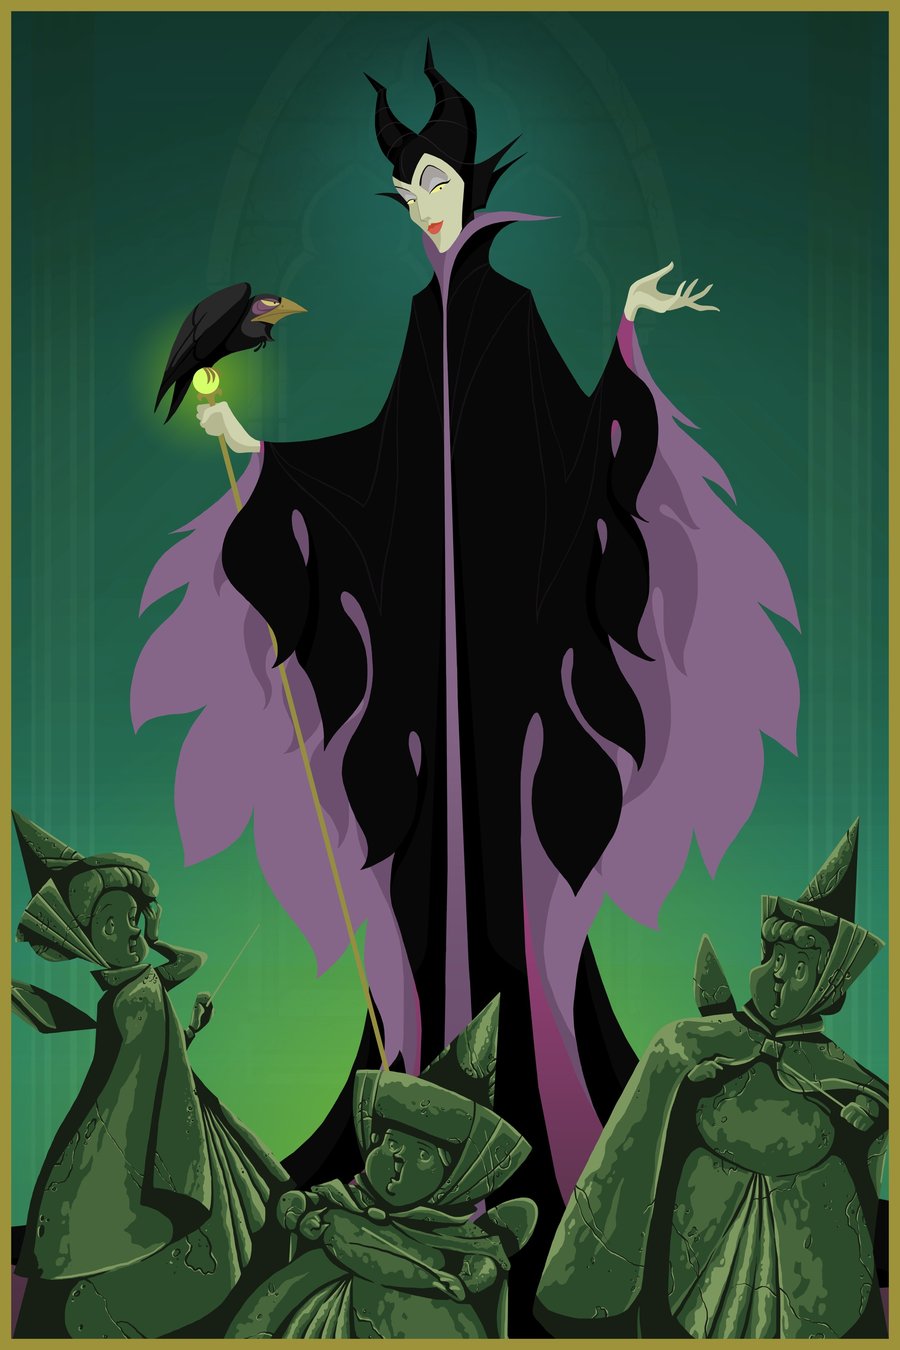 maleficent_s_magnificent_masonry_by_justin_mctwisp-d49suws